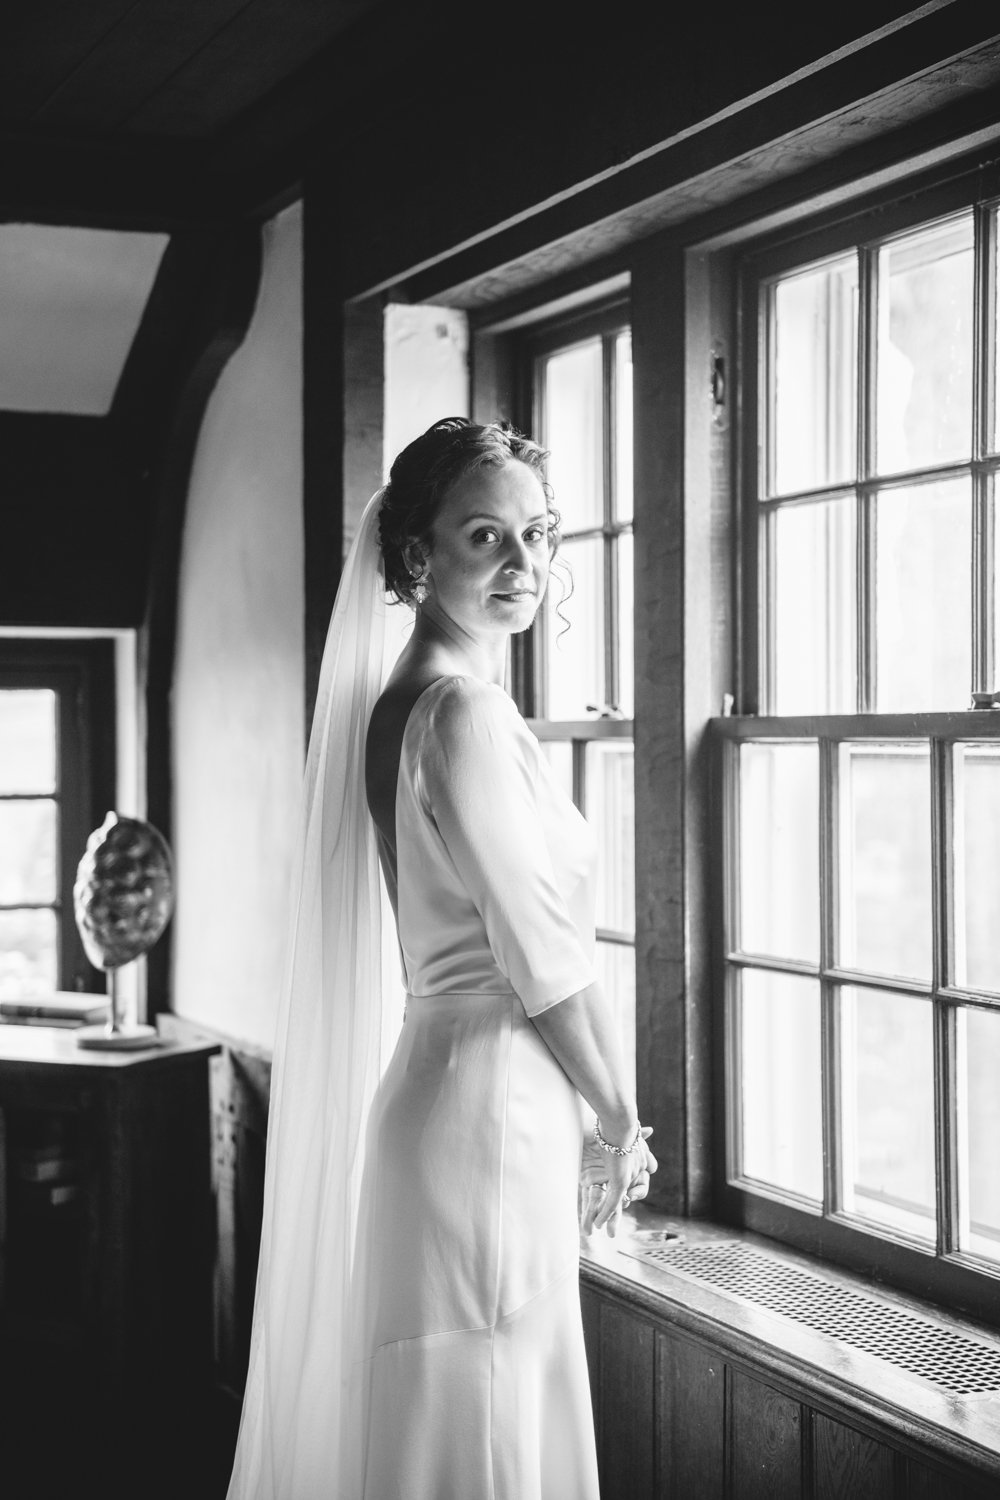 Bride stands facing a window and looks to the side and smiles at the camera.

Upstate New York Wedding Photography. Cold Spring NY Wedding Photography. Luxury Local Wedding Photographer. Destination Wedding Photographer.